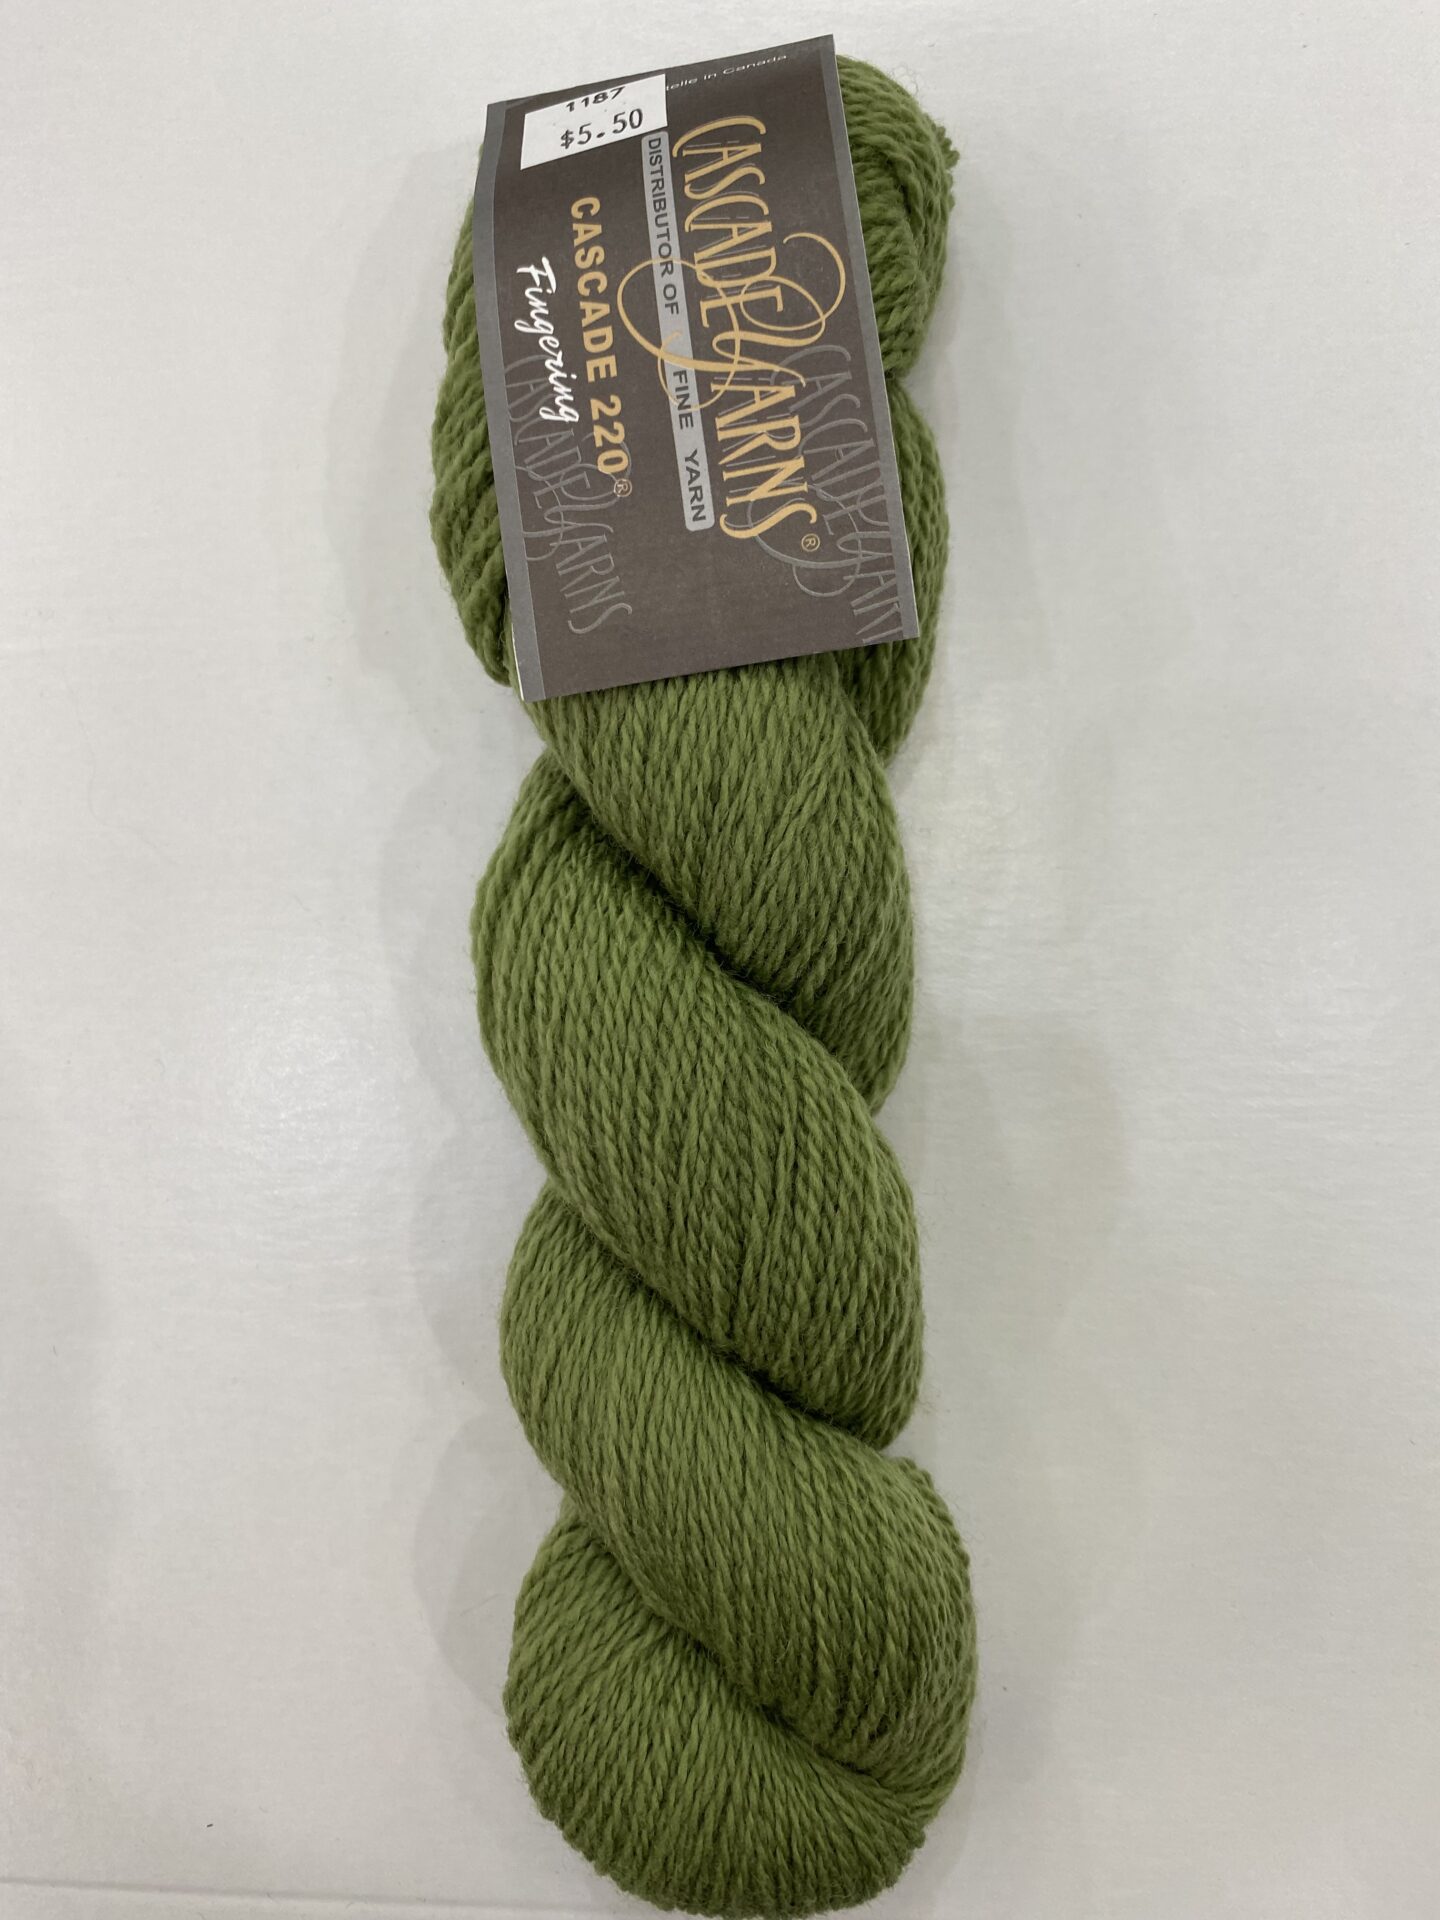 A big bunch of wool in olive green color